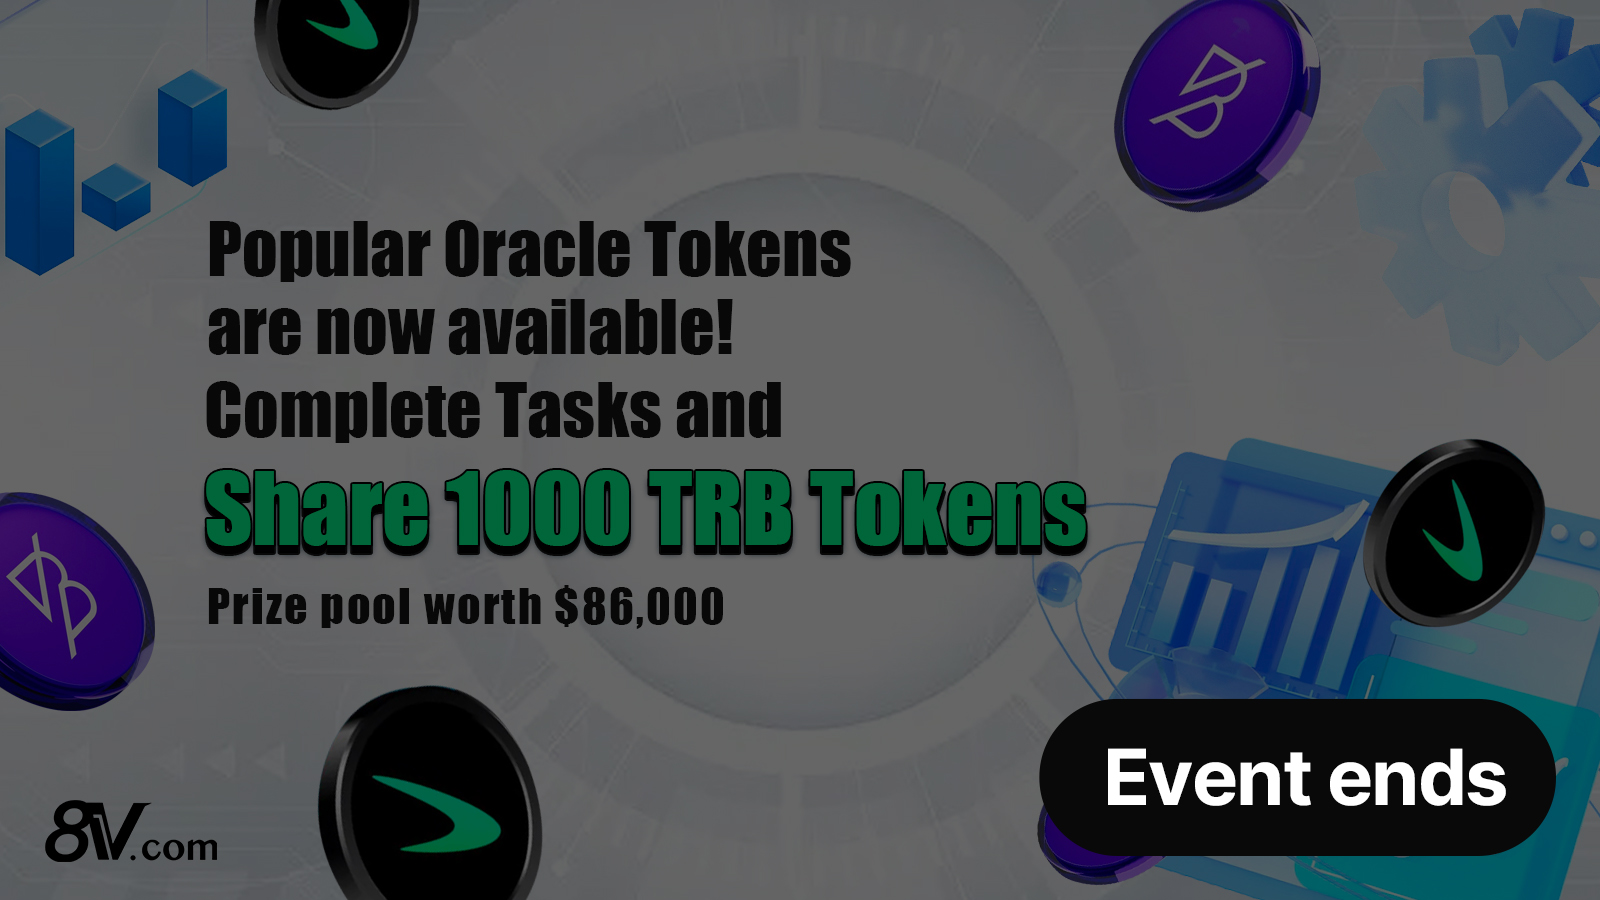 Popular Oracle Tokens are now Available! Complete Tasks and Share 1000 TRB Tokens